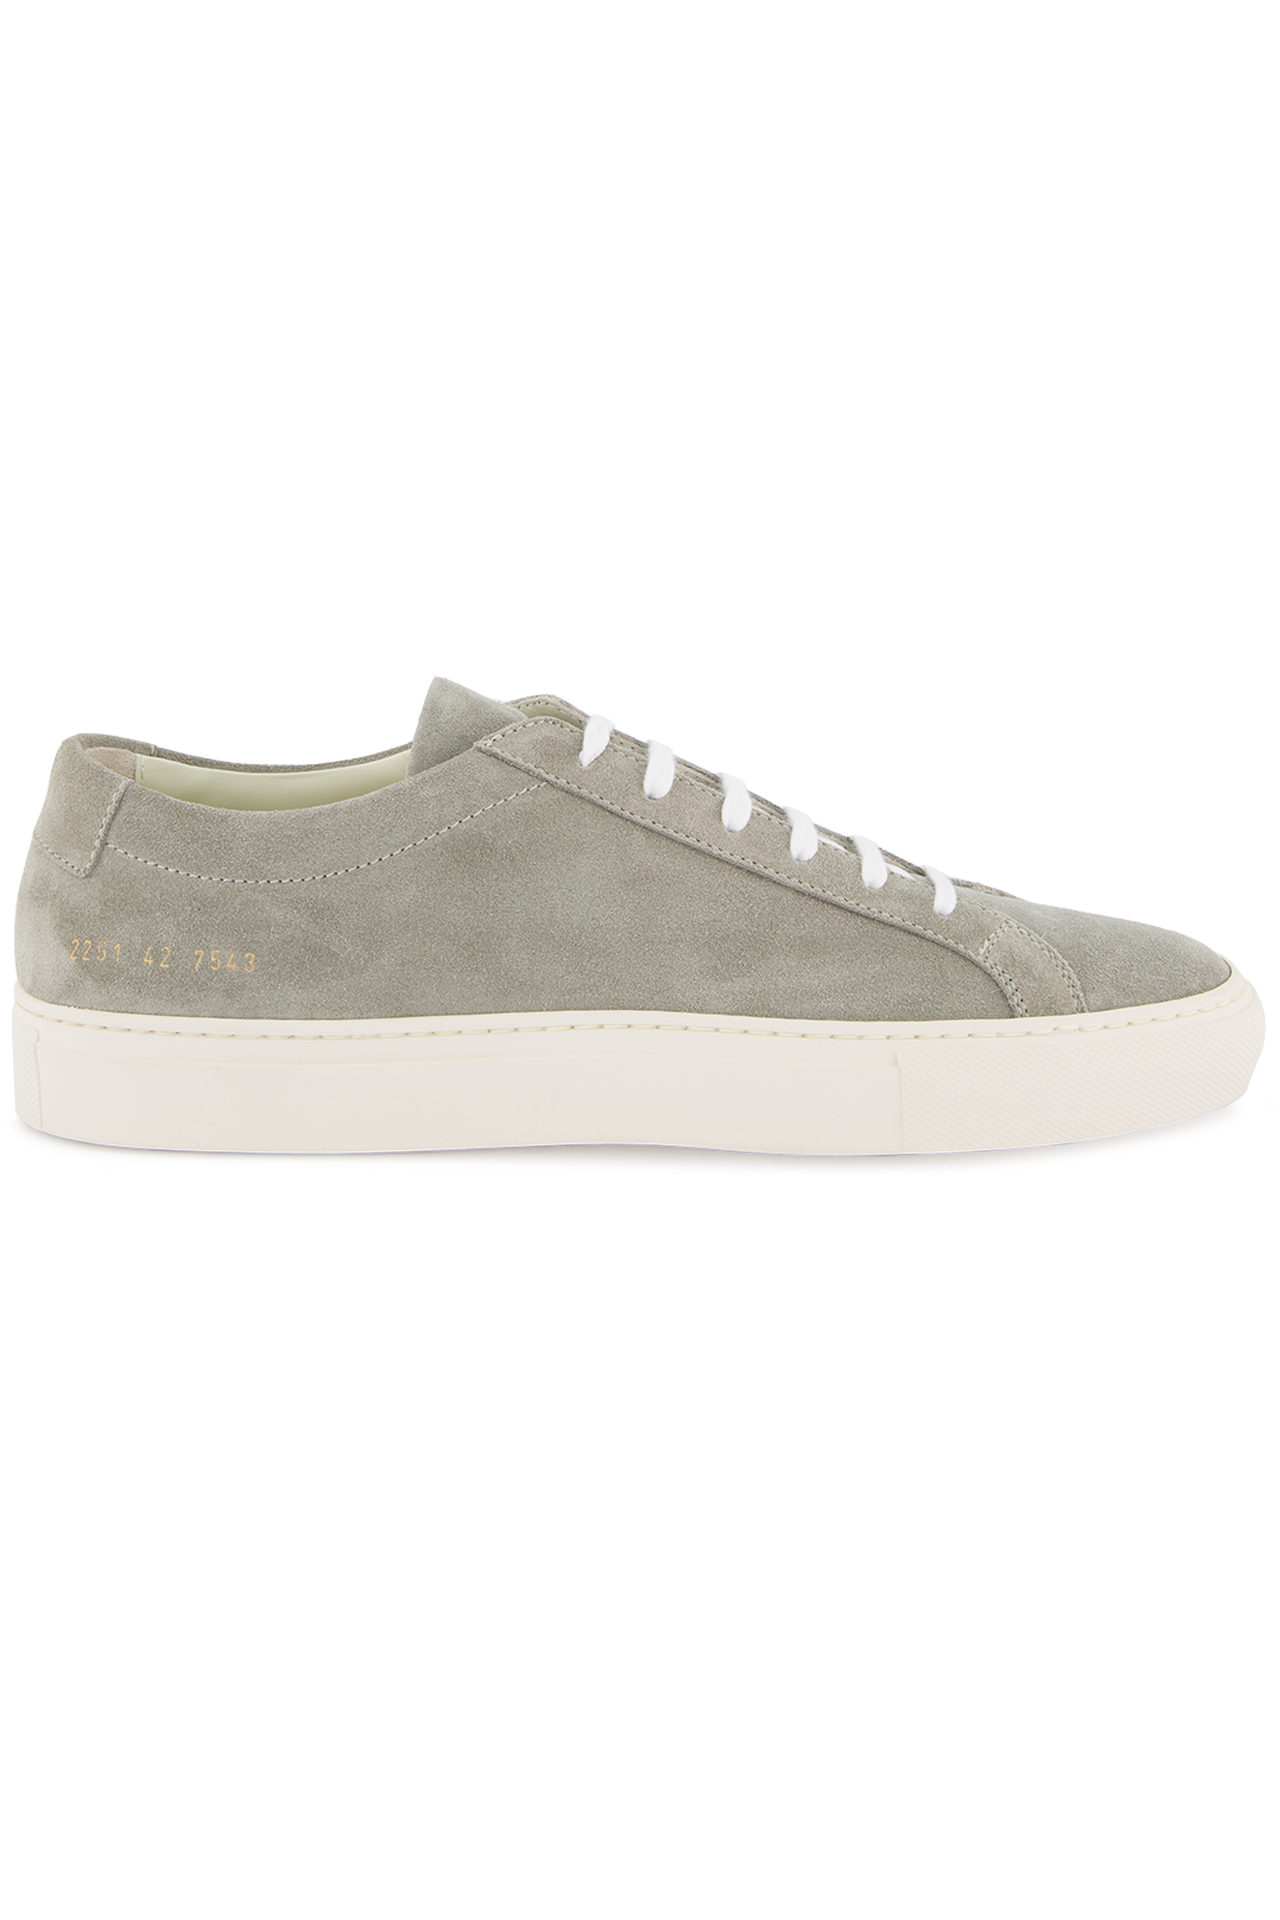 common projects grey suede achilles